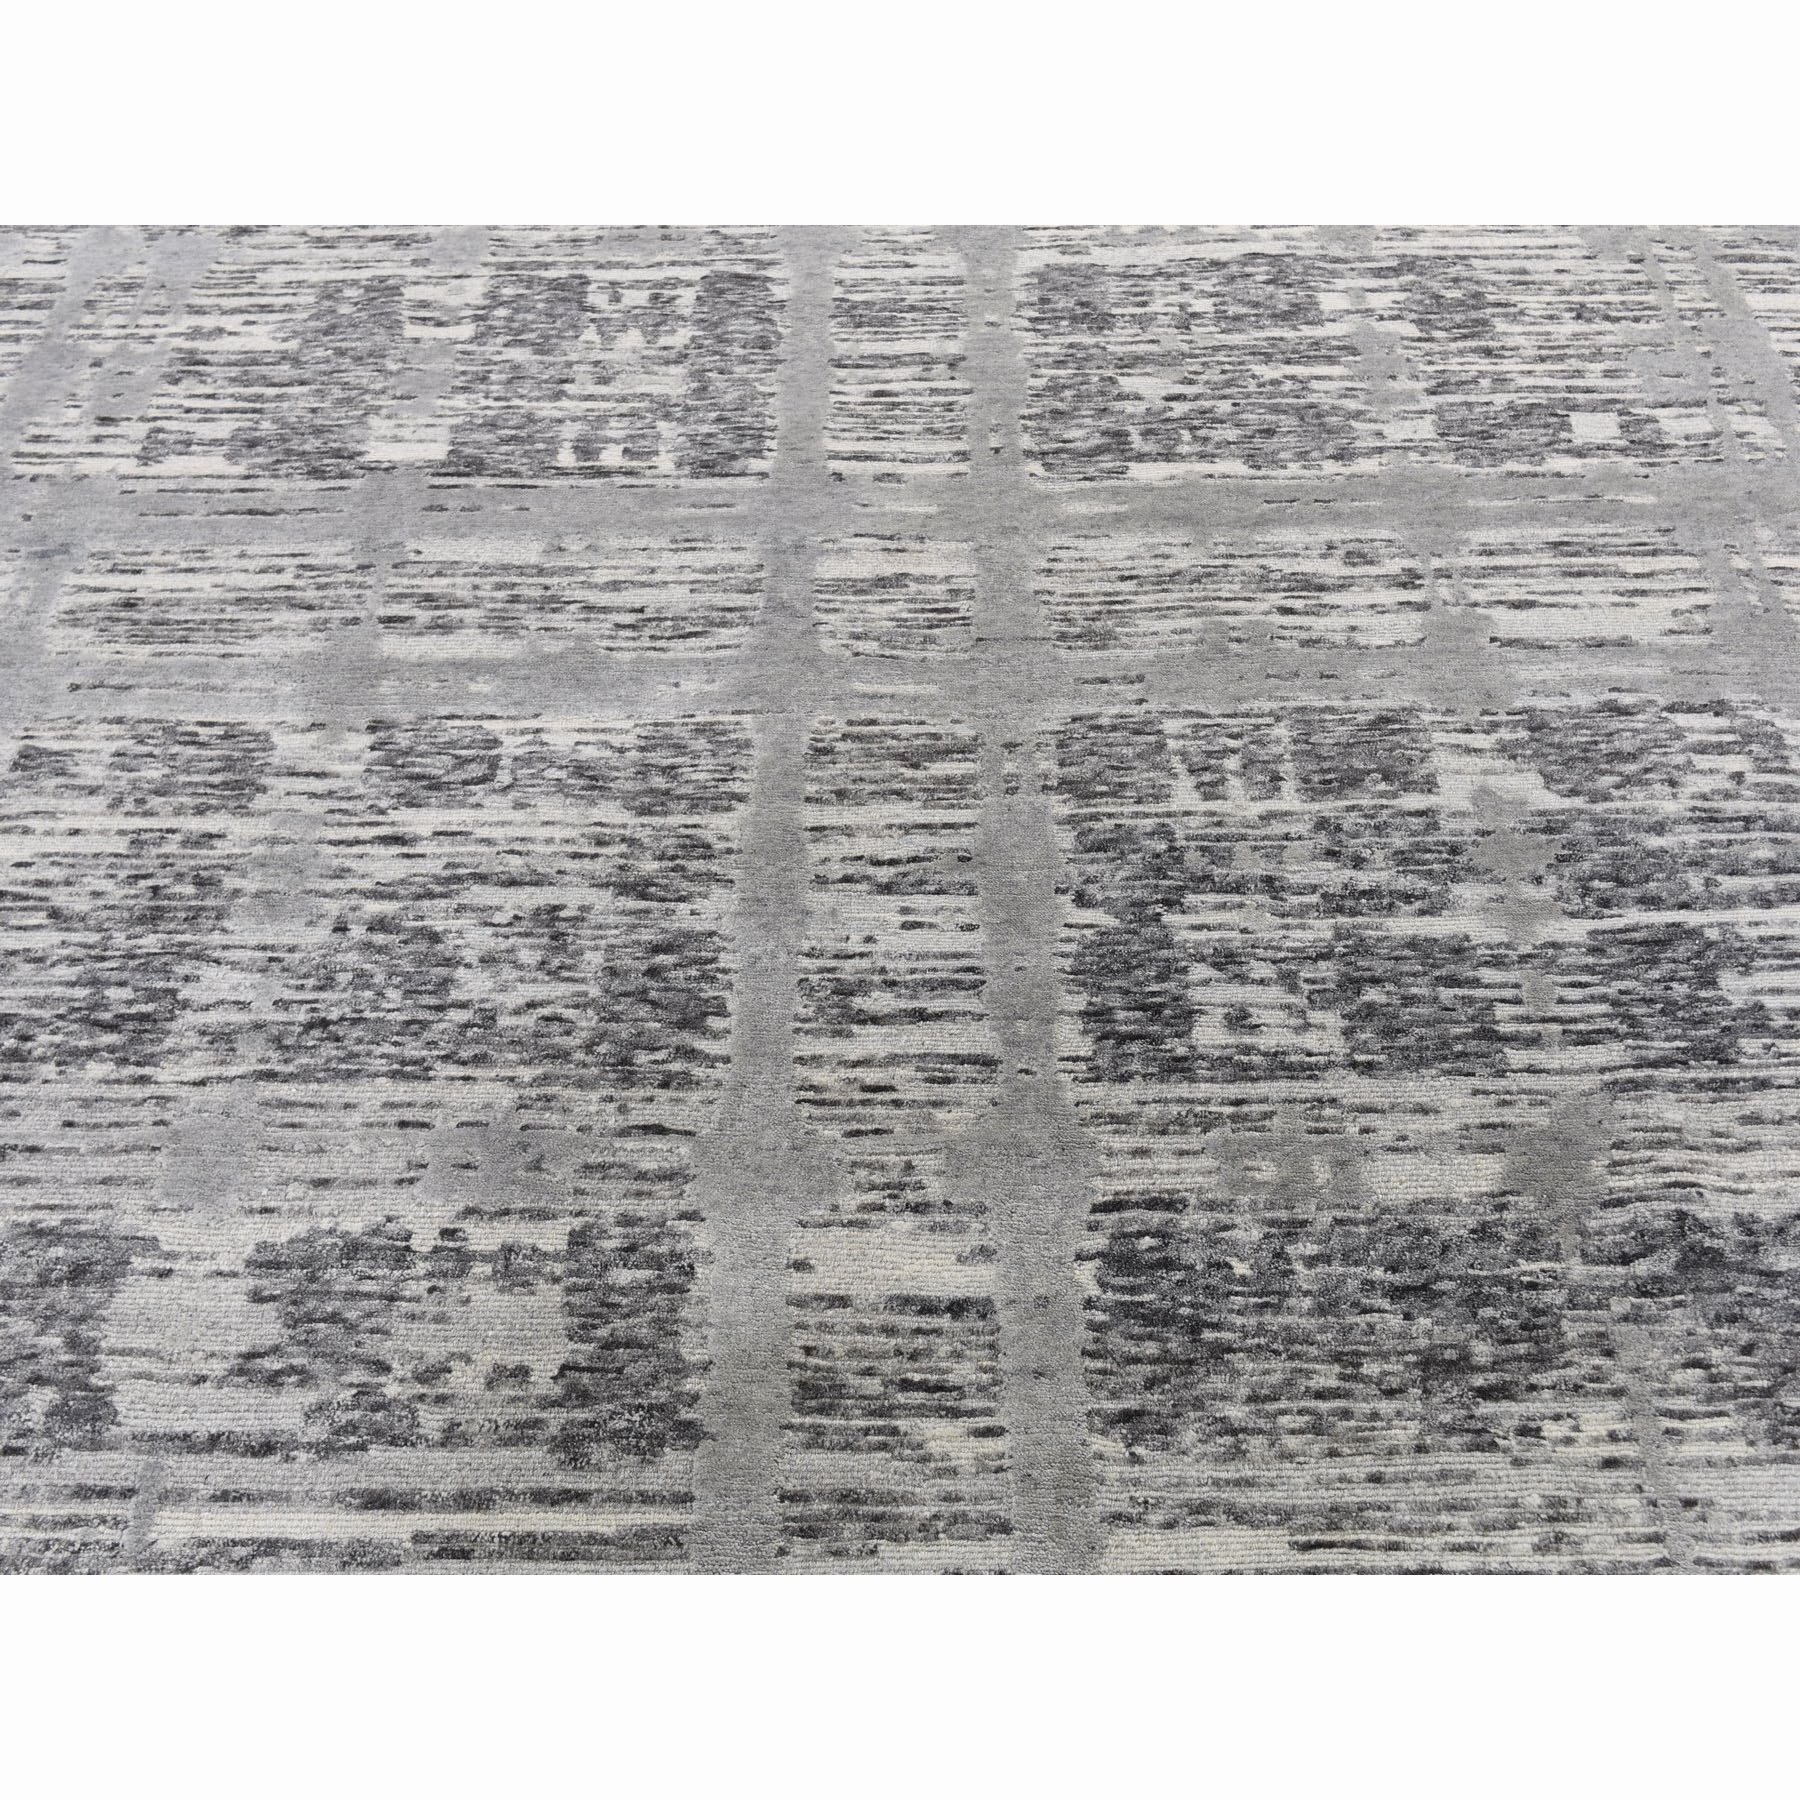 12-3 x12-3  Square Hand Spun Undyed Natural Wool Gray Modern Oriental Hand Knotted Oriental Rug 